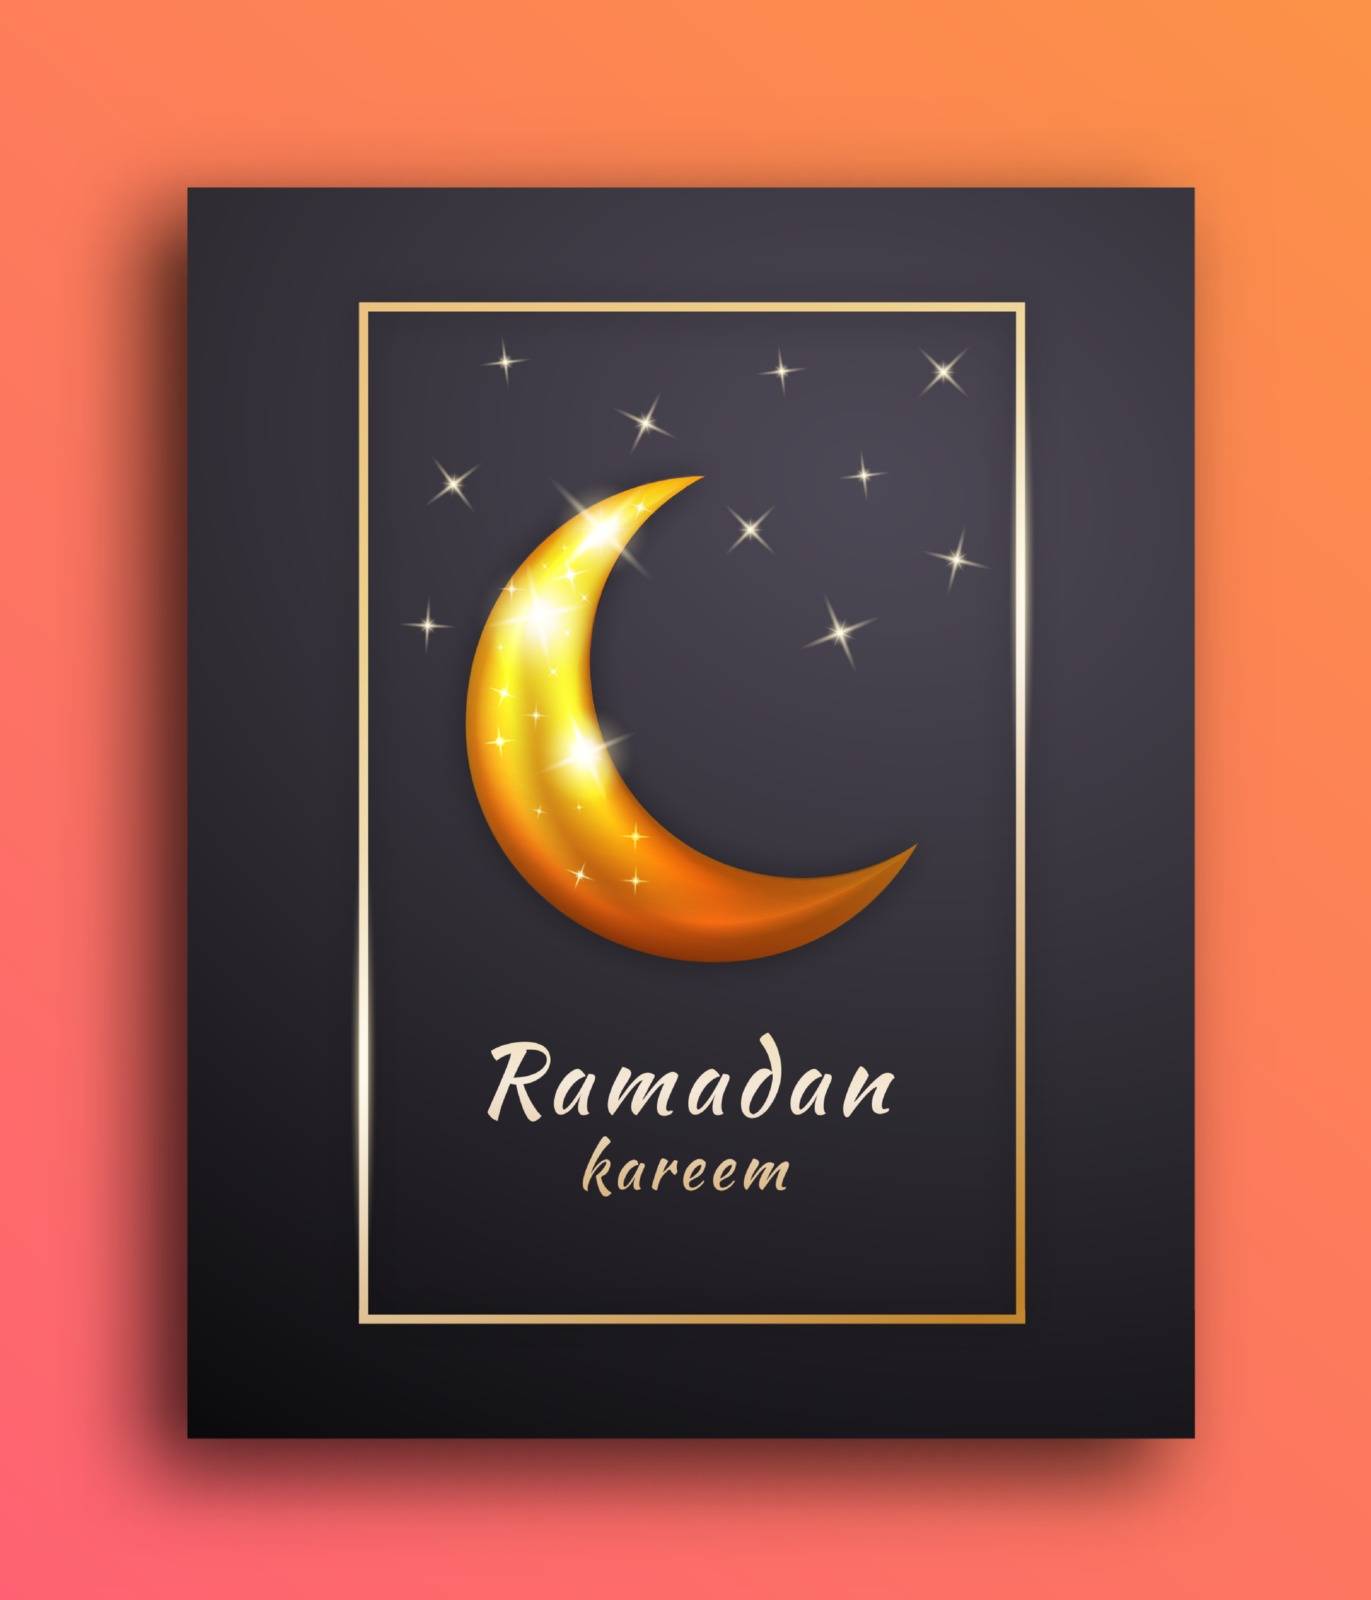 Background Frame of Ramadan Mubarak with the Moon and Shining Stars to Celebrate and Welcome the Month of Ramadan.